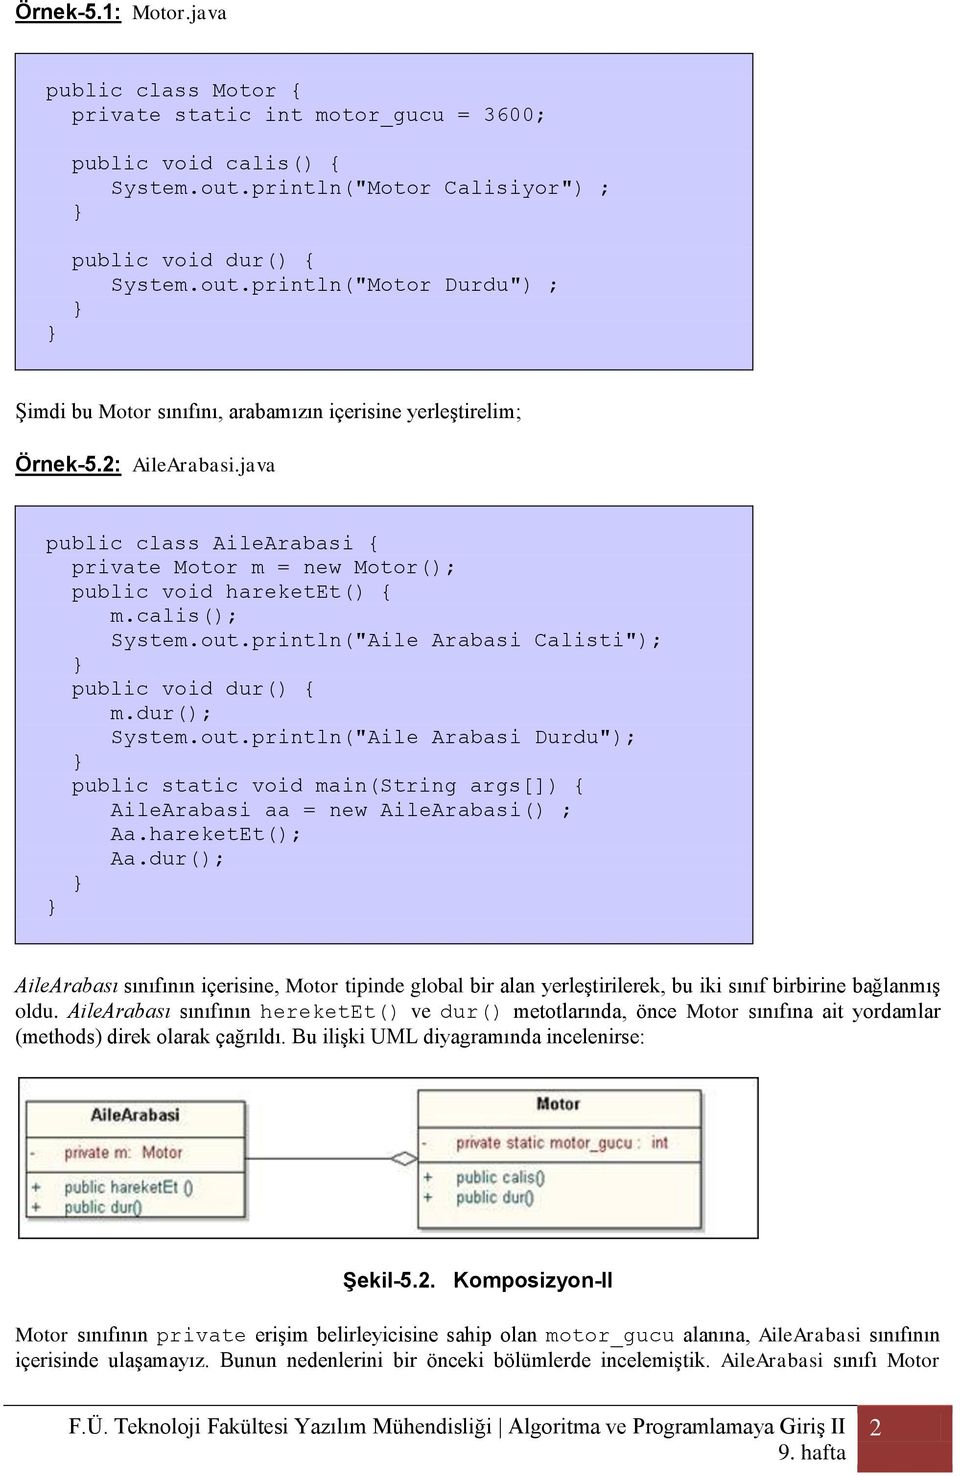 java () public class AileArabasi { private Motor m = new Motor(); public void hareketet() { m.calis(); System.out.